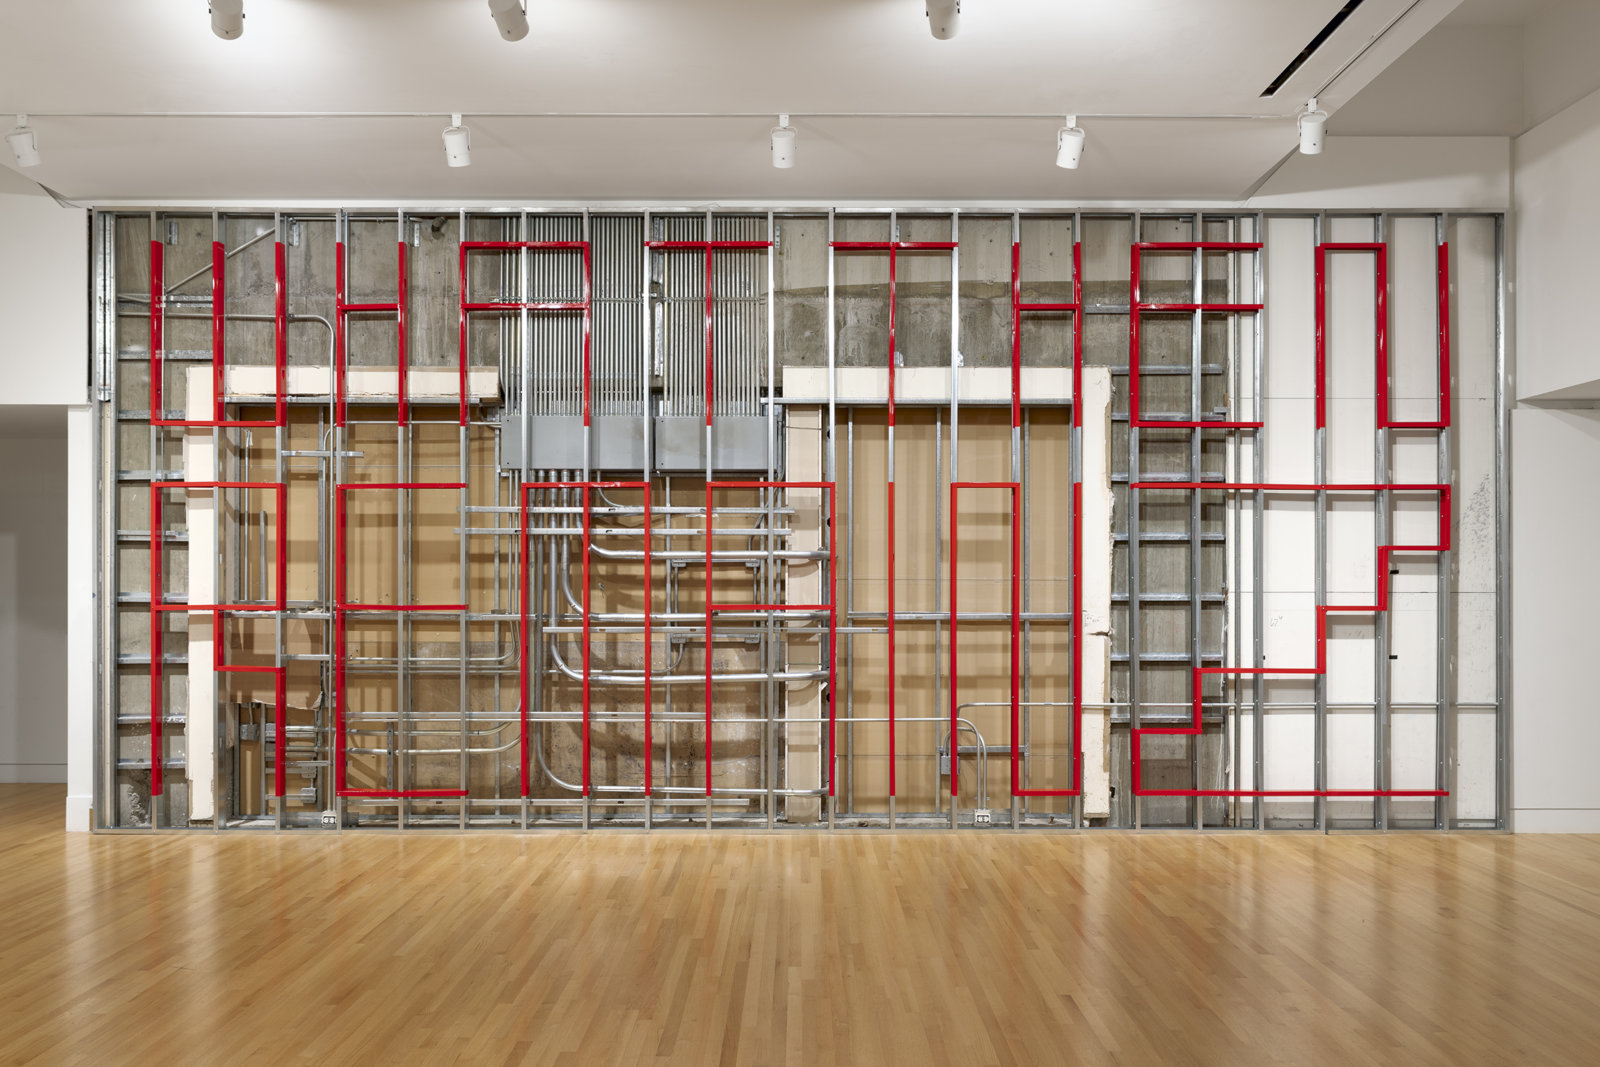 Duane Linklater, What Then Remainz, 2016, disassembled wall(s), powder-coated steel, steel screws, dimensions variable. Installation view, mymothersside, Frye Art Museum, Seattle, 2021